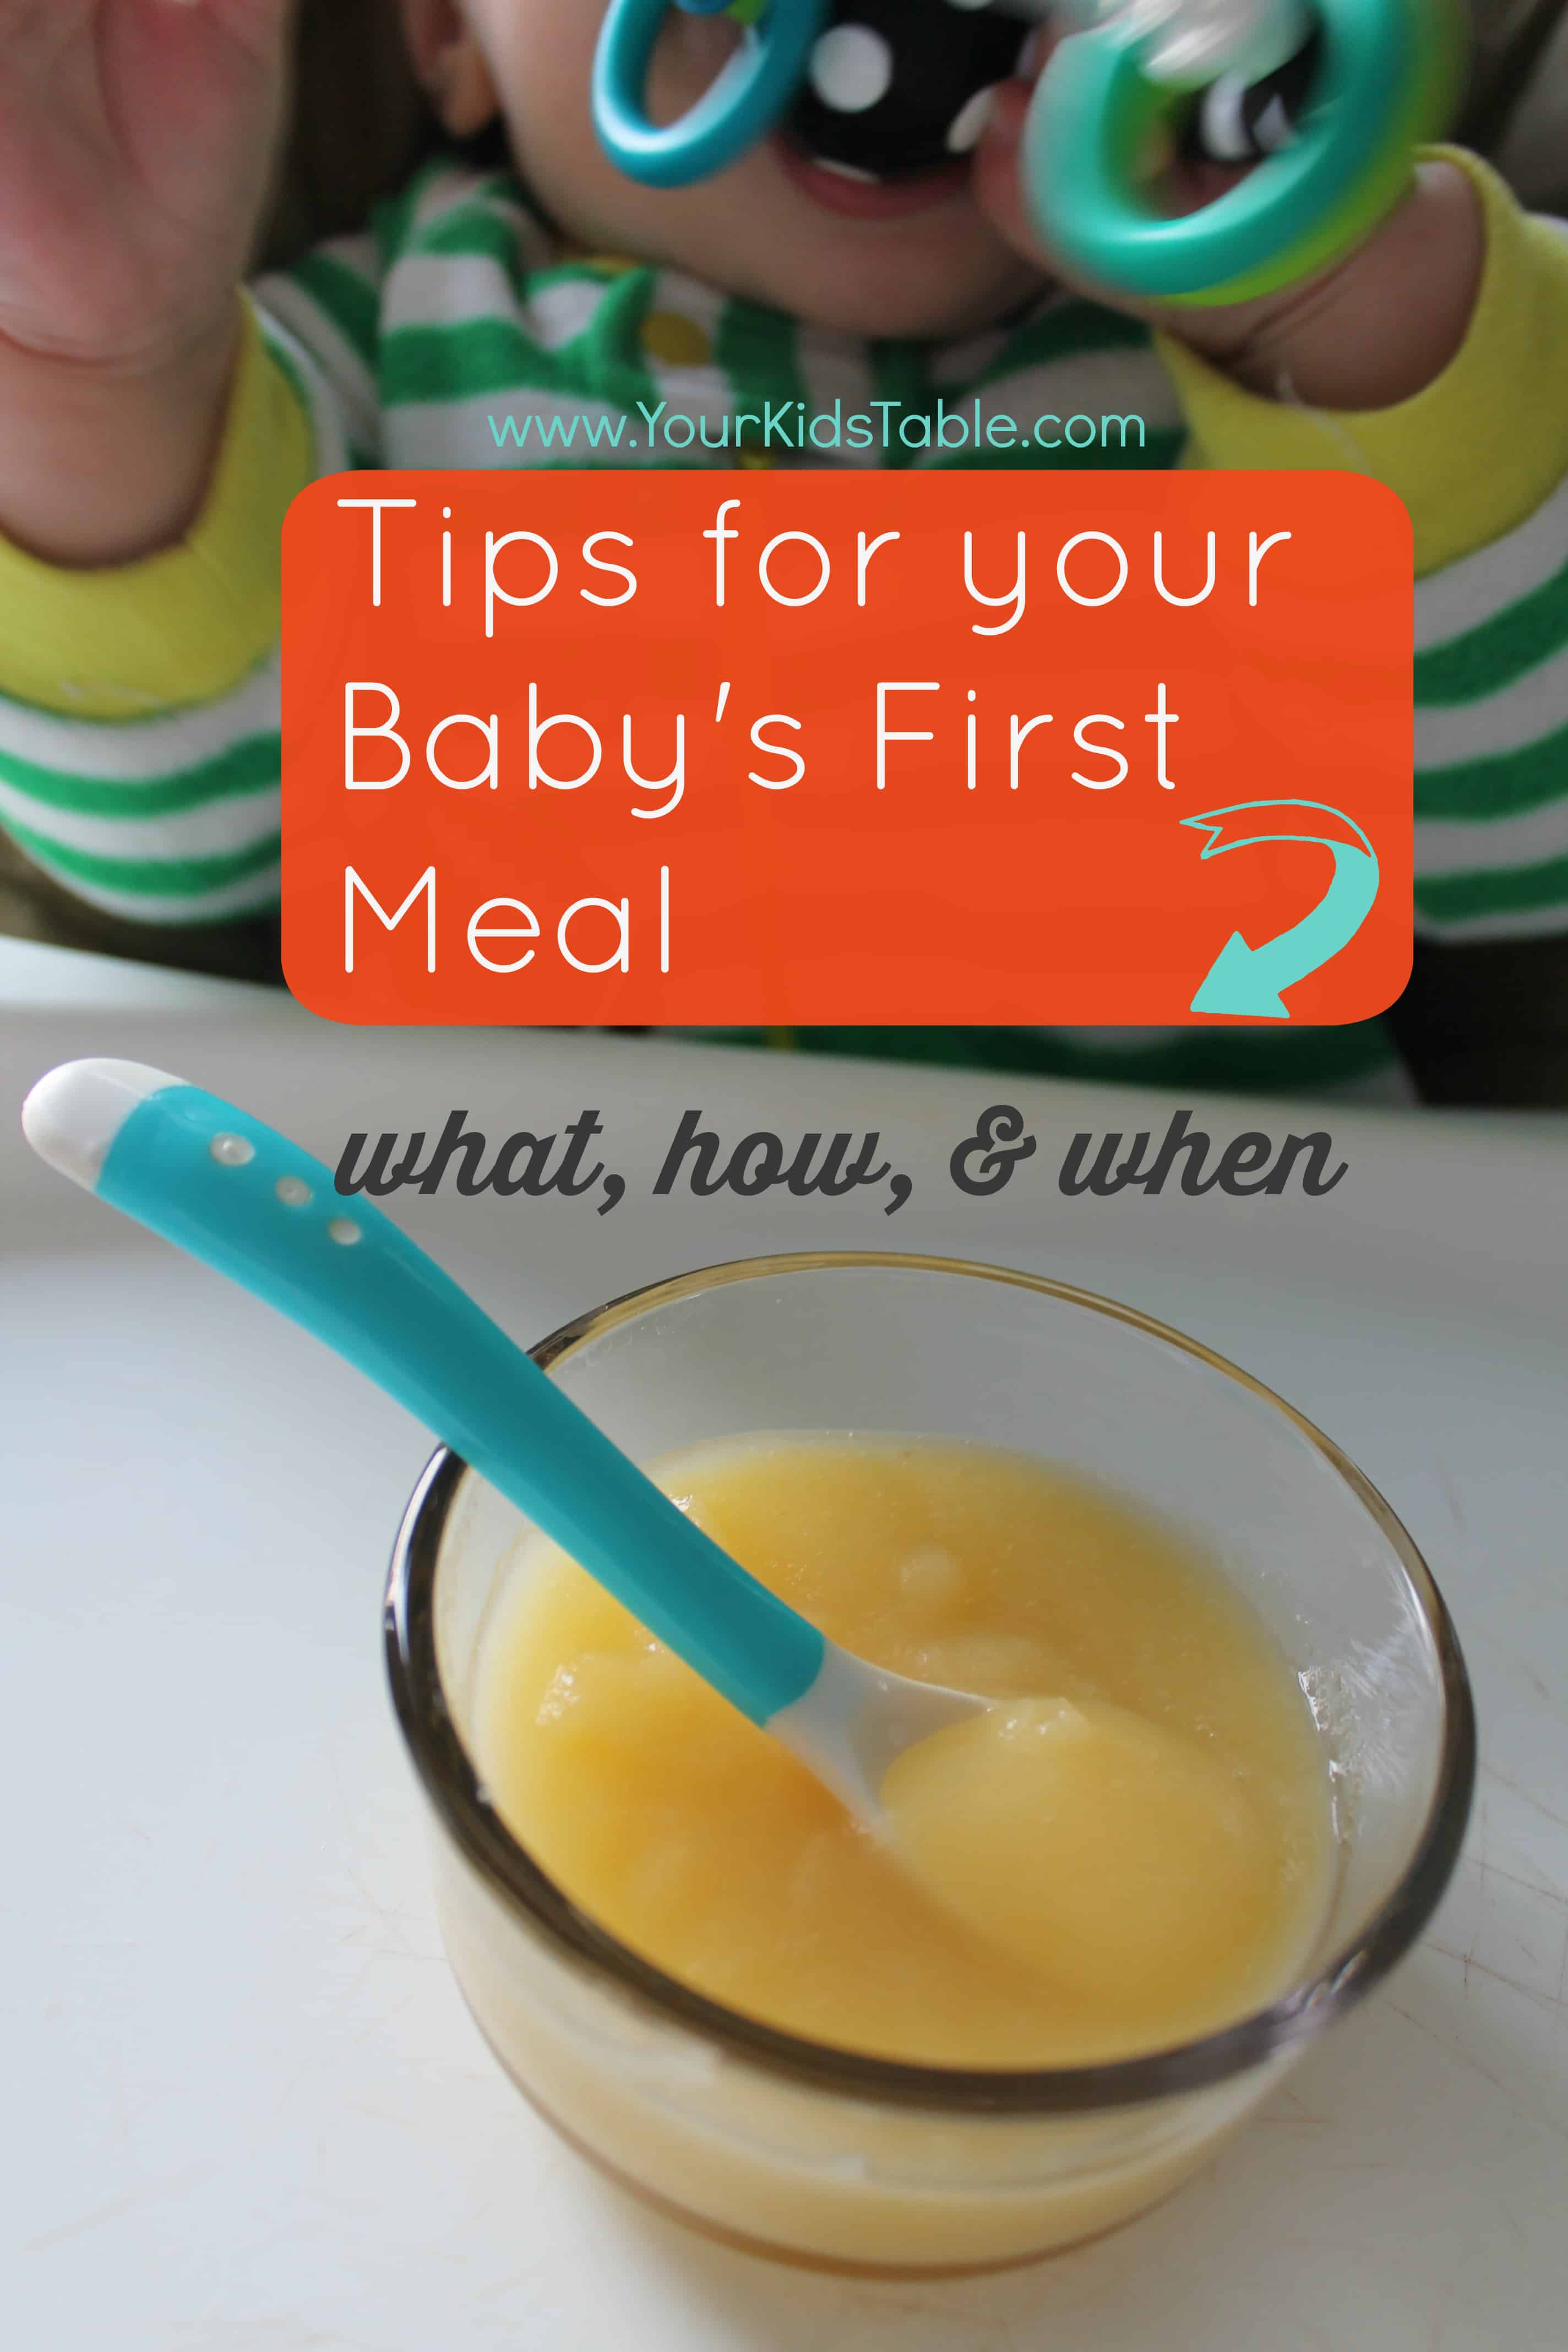 https://yourkidstable.com/wp-content/uploads/2015/03/babys-first-meal-1.jpg